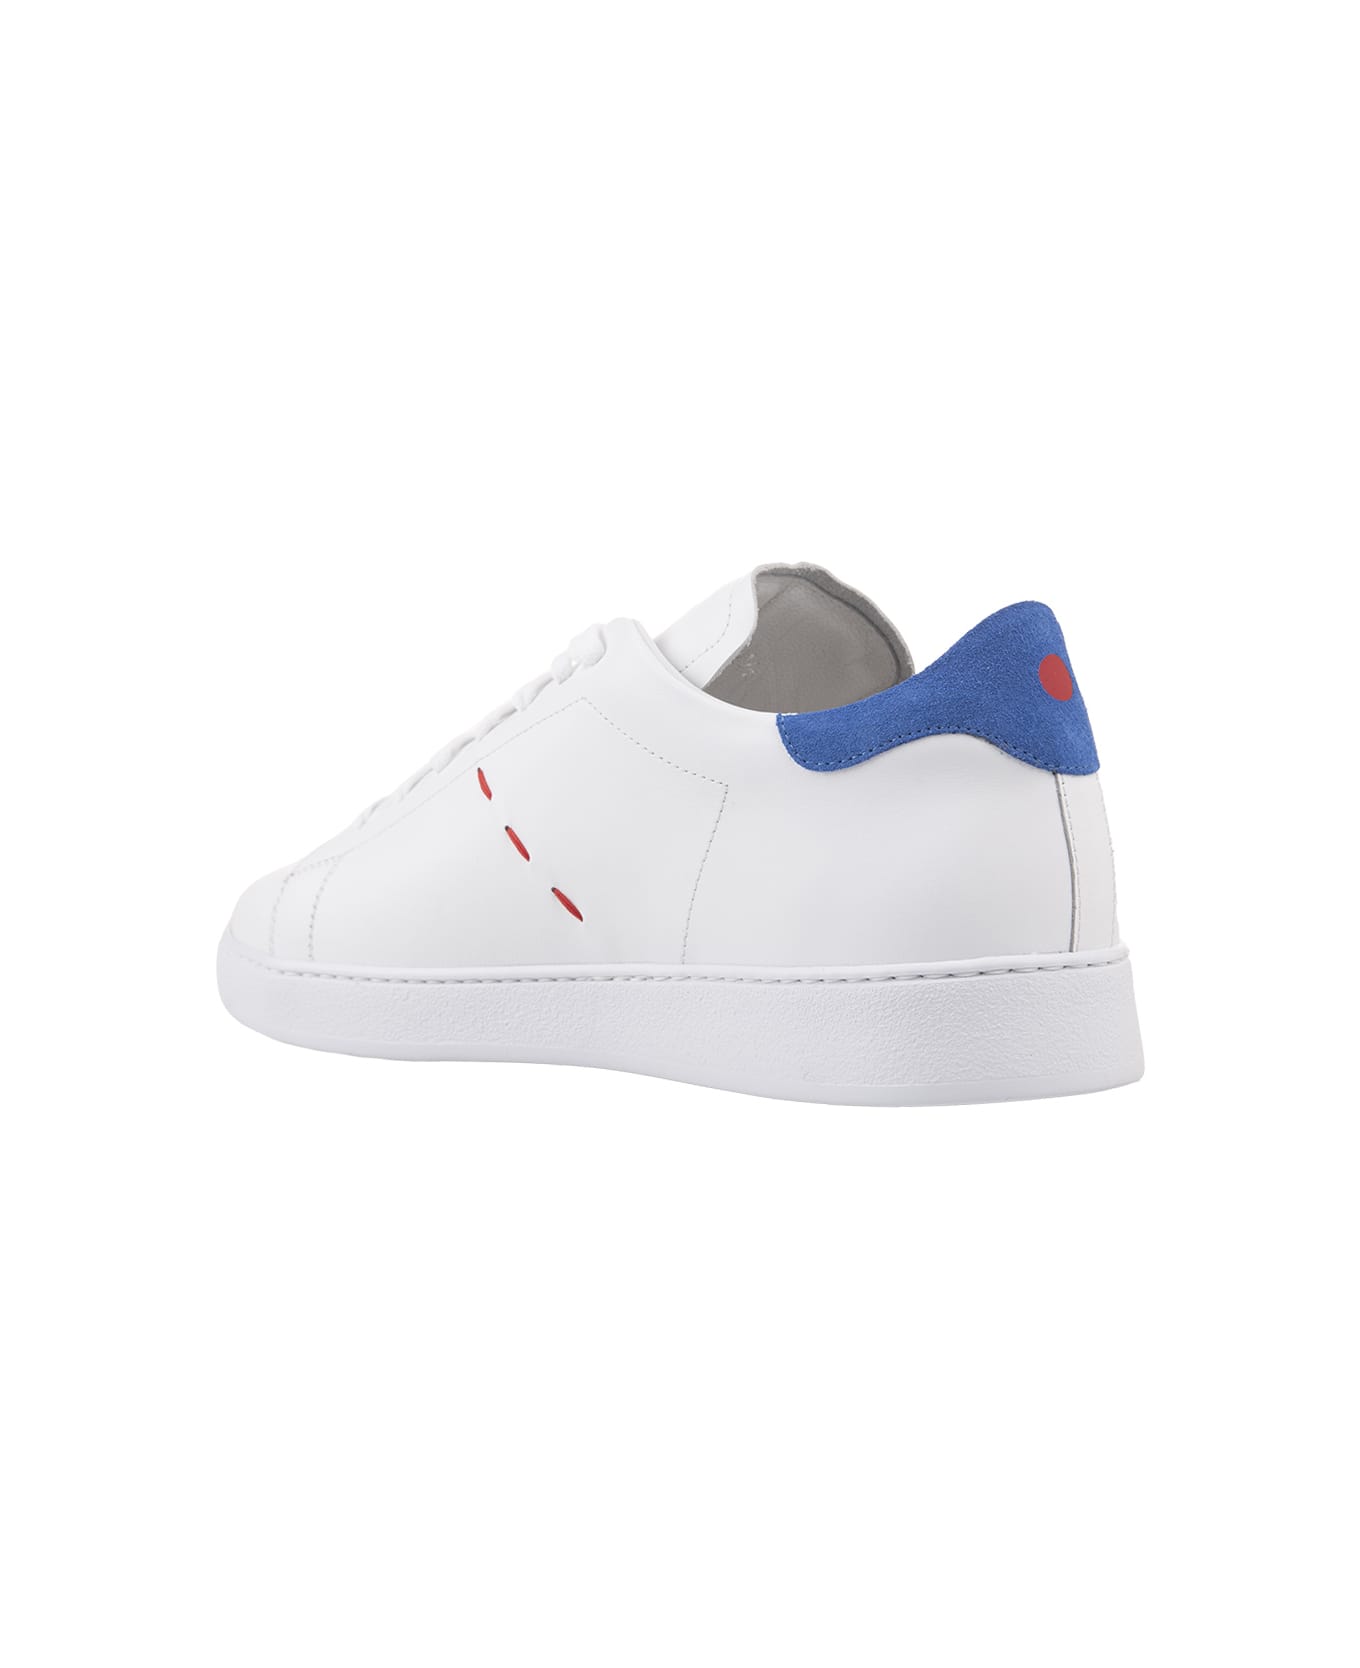 Kiton White Leather Sneakers With Blue Details - Blue